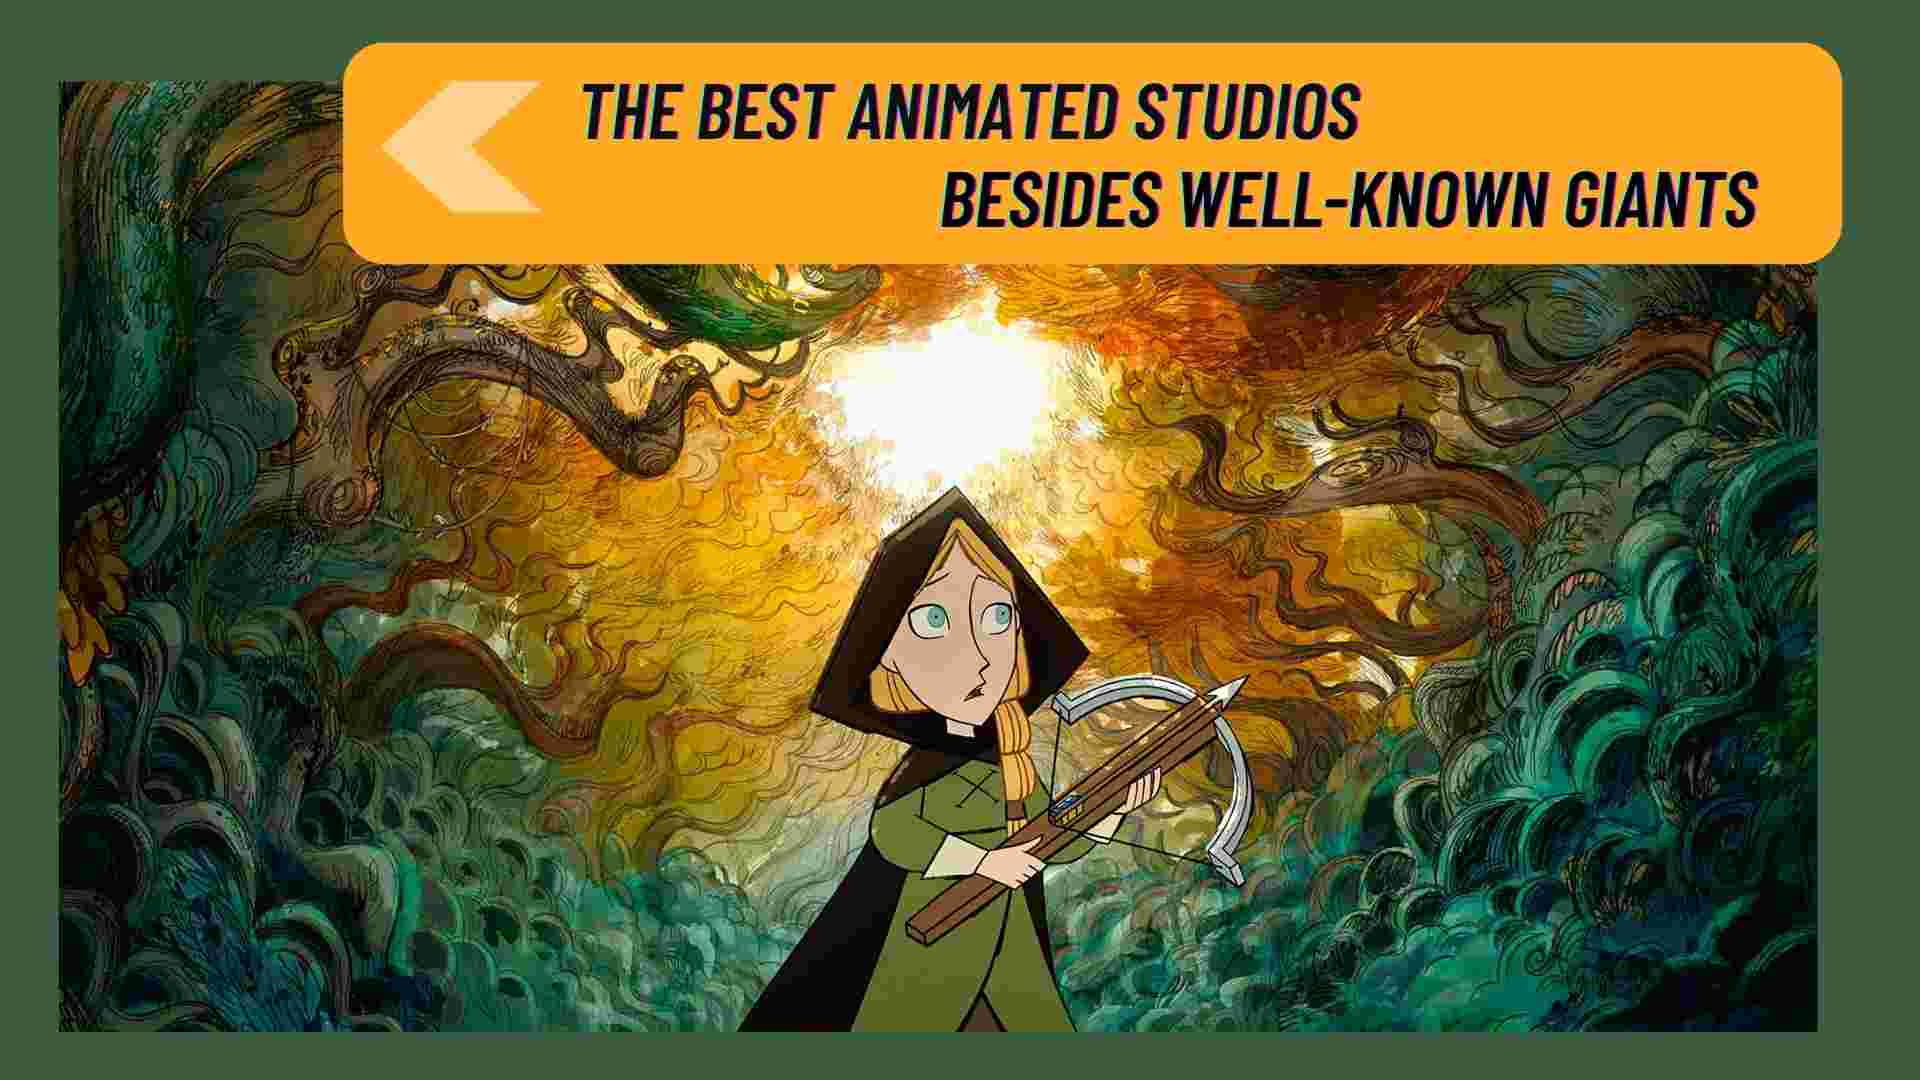 Best Animation Studios Beyond Renowned Animation Giants